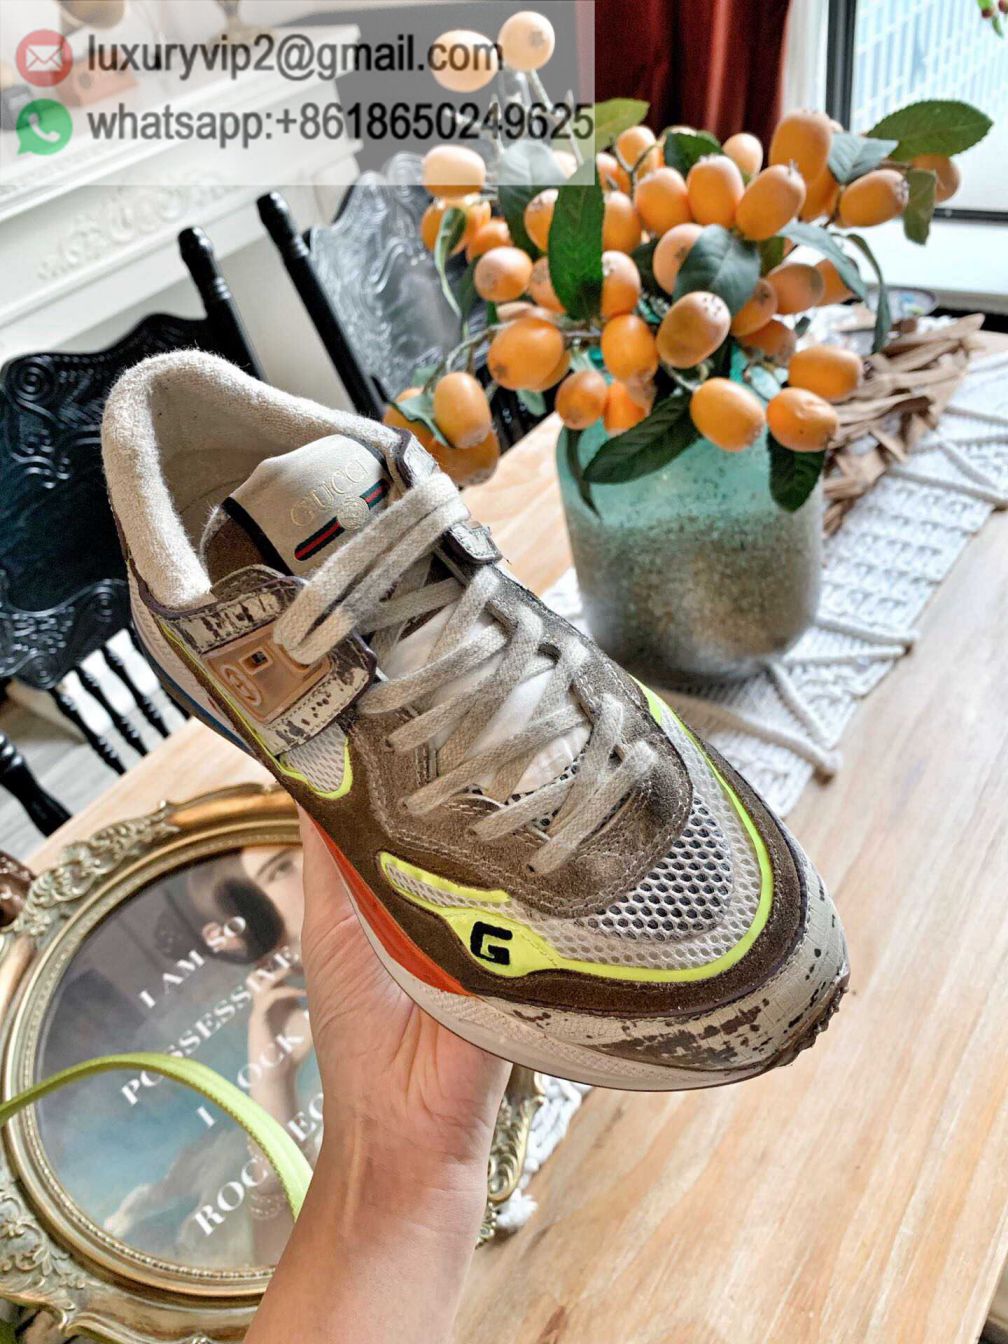 GG 2019 Ultrapace Unisex Sneakers